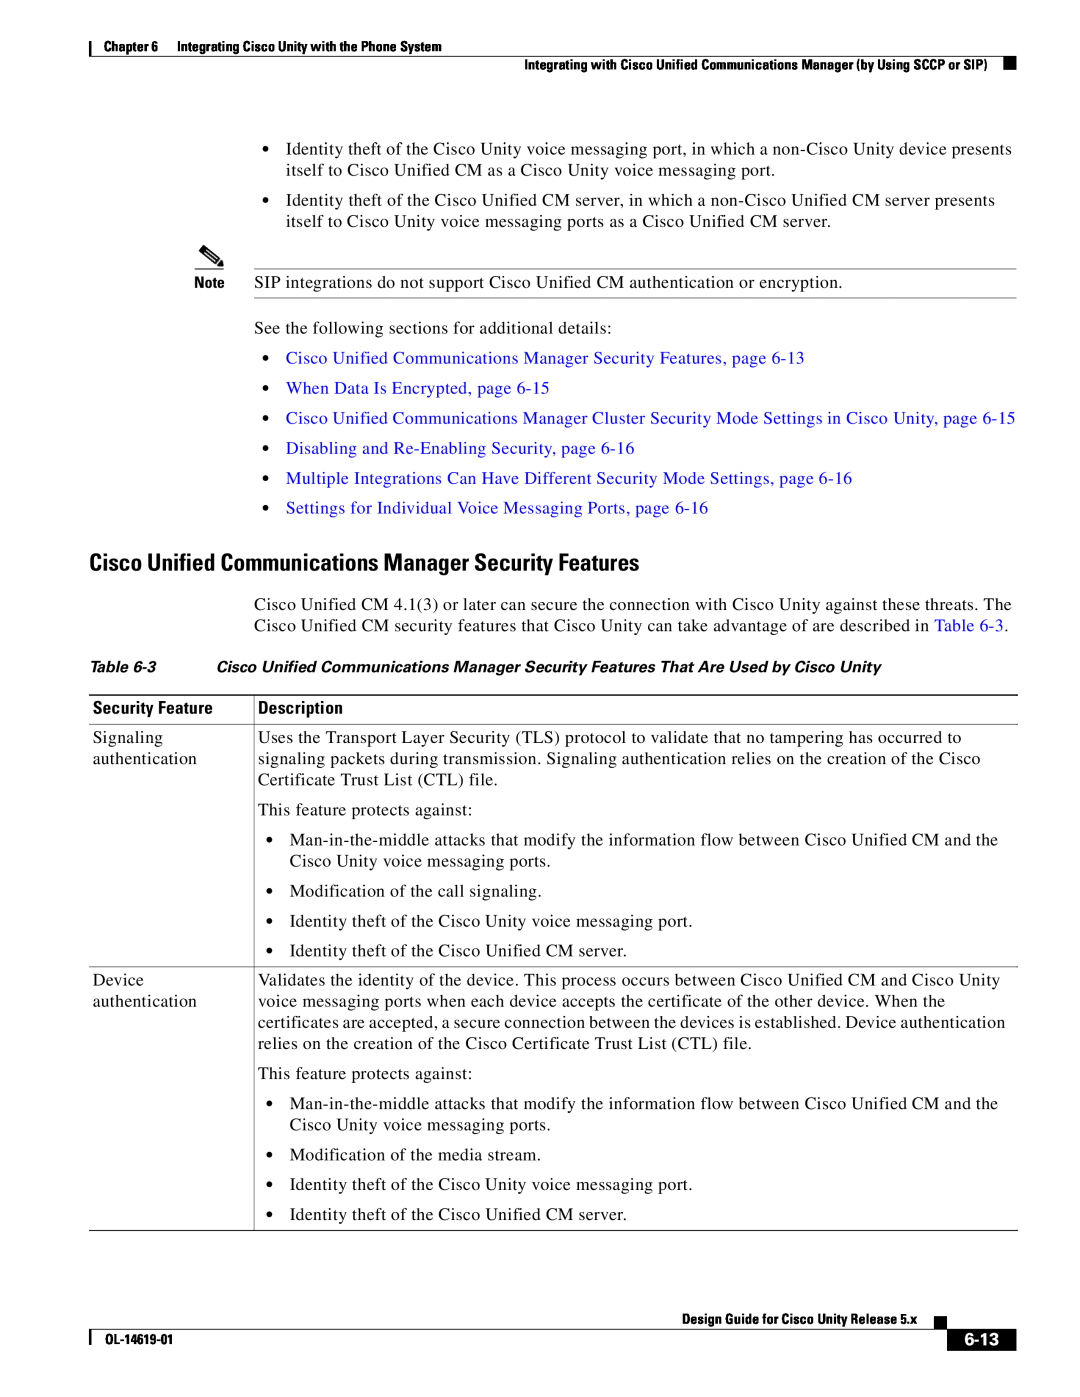 Cisco Systems OL-14619-01 manual Cisco Unified Communications Manager Security Features, When Data Is Encrypted, page, 6-13 